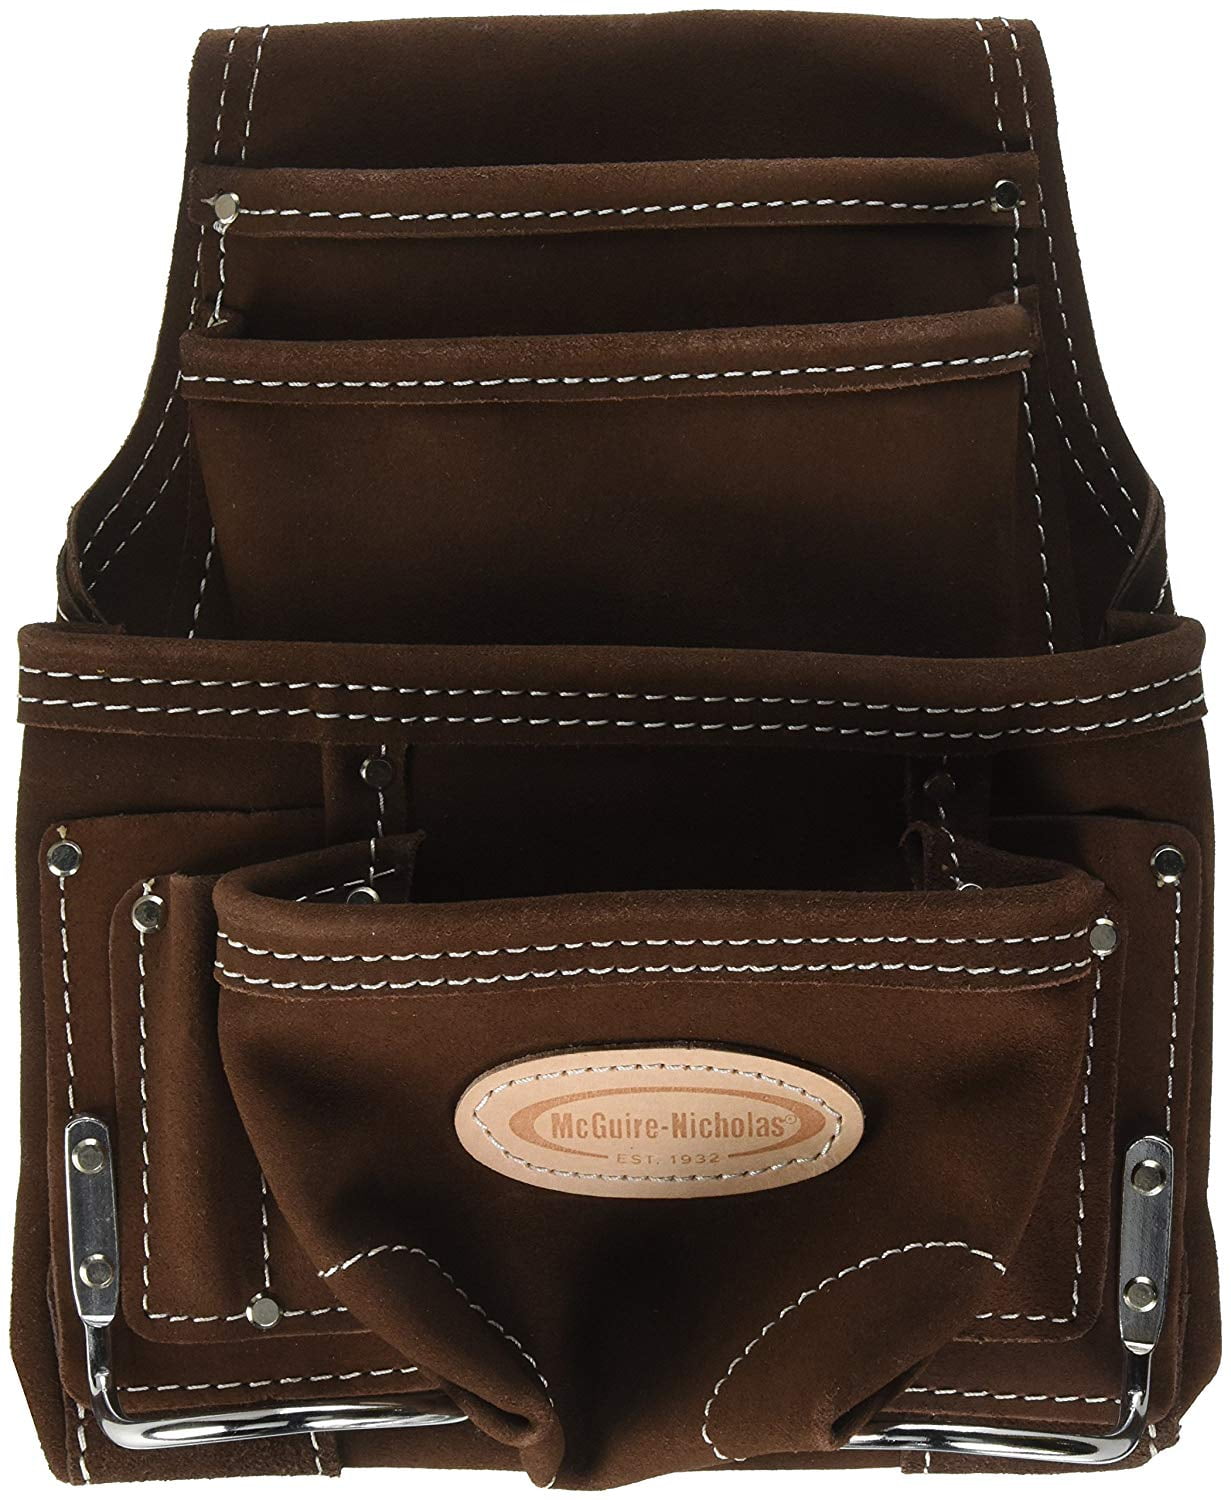 McGuire-Nicholas 526-CC Brown Professional Electricians Pouch 1-Pack Oil Tanned Leather